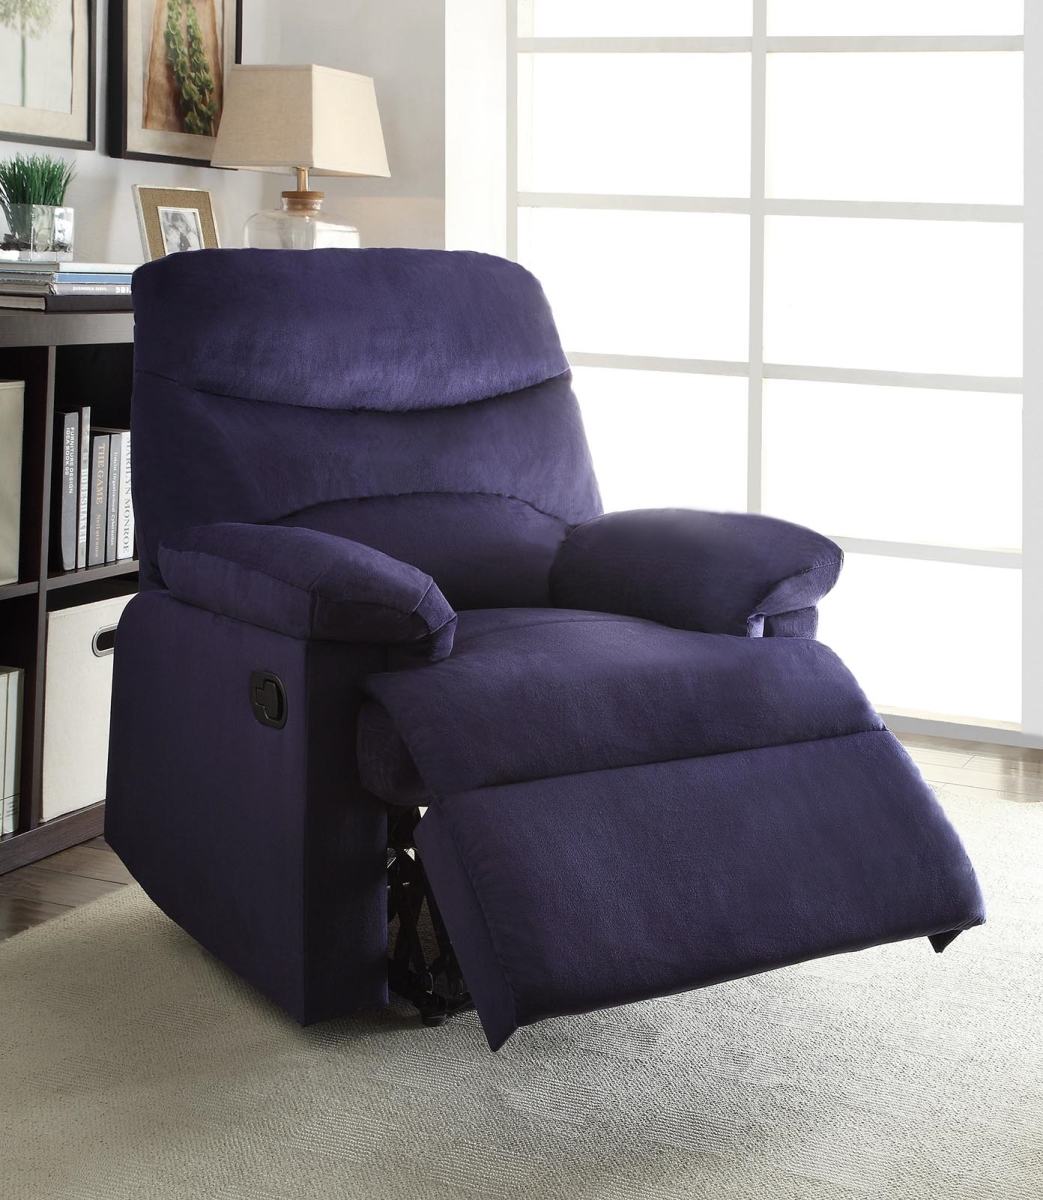 Home Roots Furniture 286519 40 X 35 X 35 In. Woven Fabric & Wood Recliner - Blue